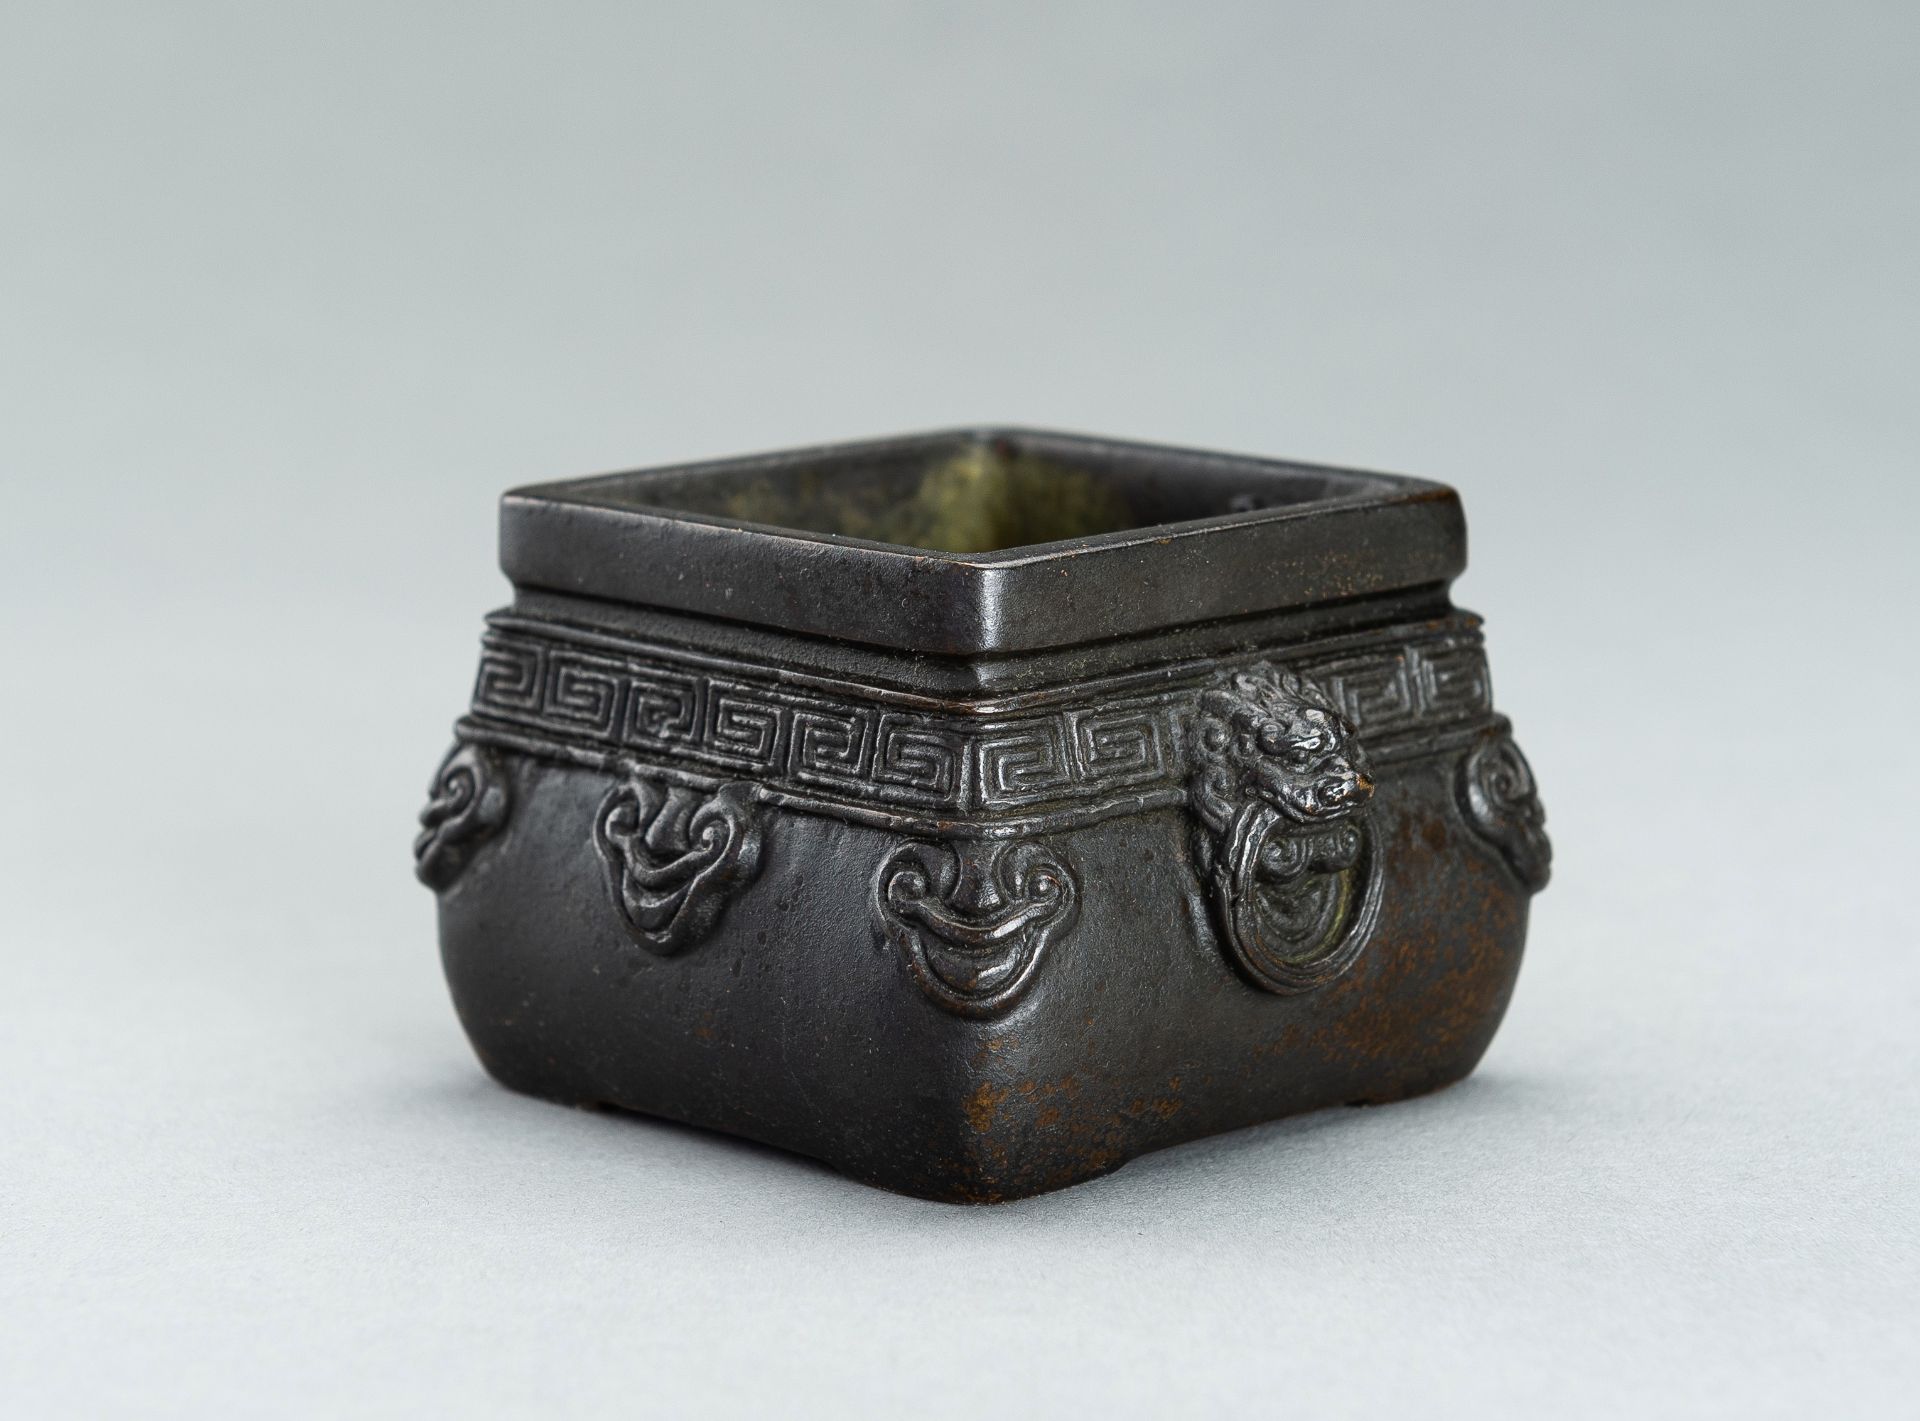 A SMALL BRONZE CENSER WITH LION MASK HANDLES, 17TH to 18th CENTURY